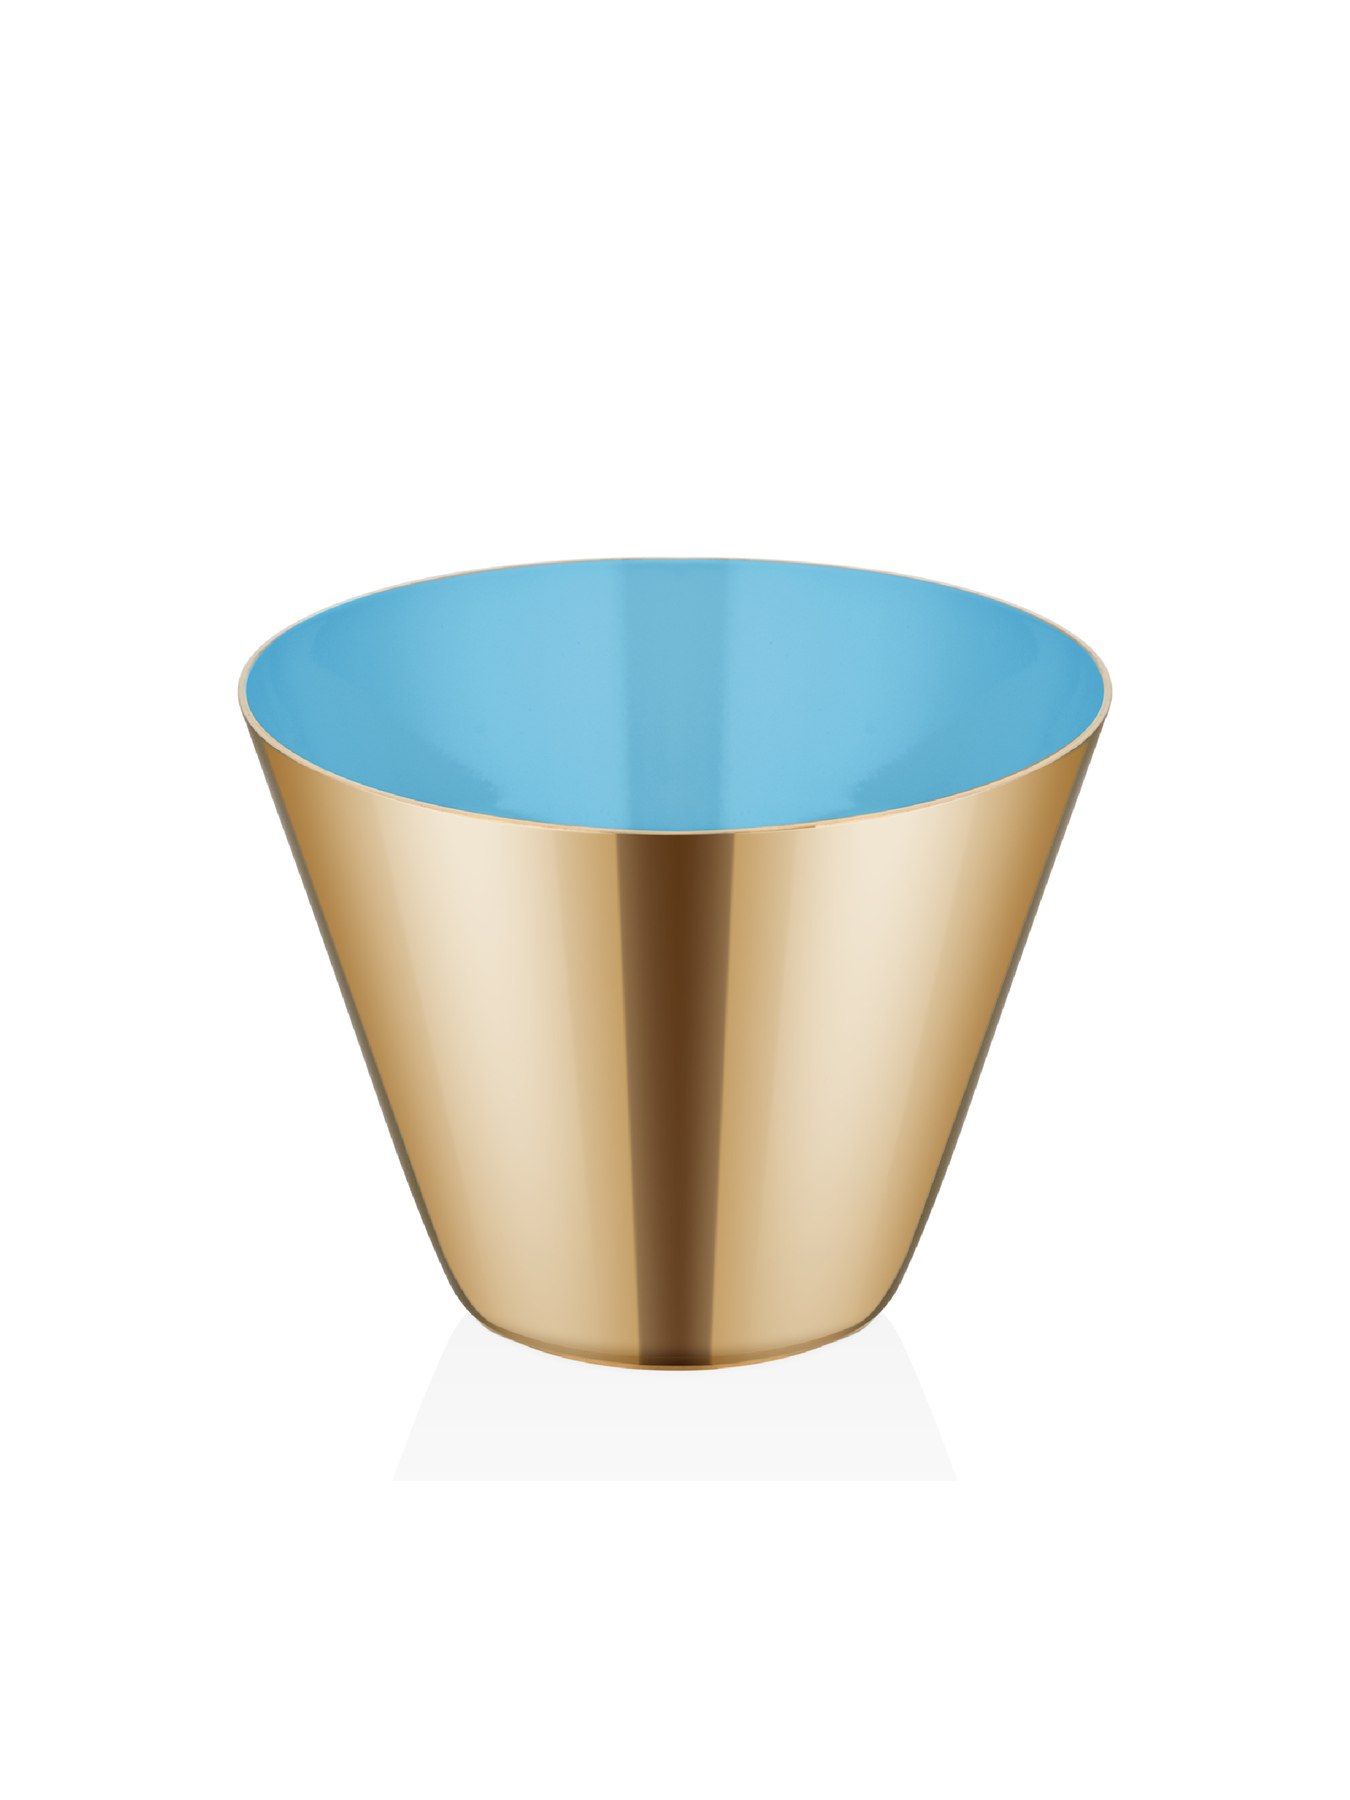 Conical - Nut Bowl - Gold & Blue